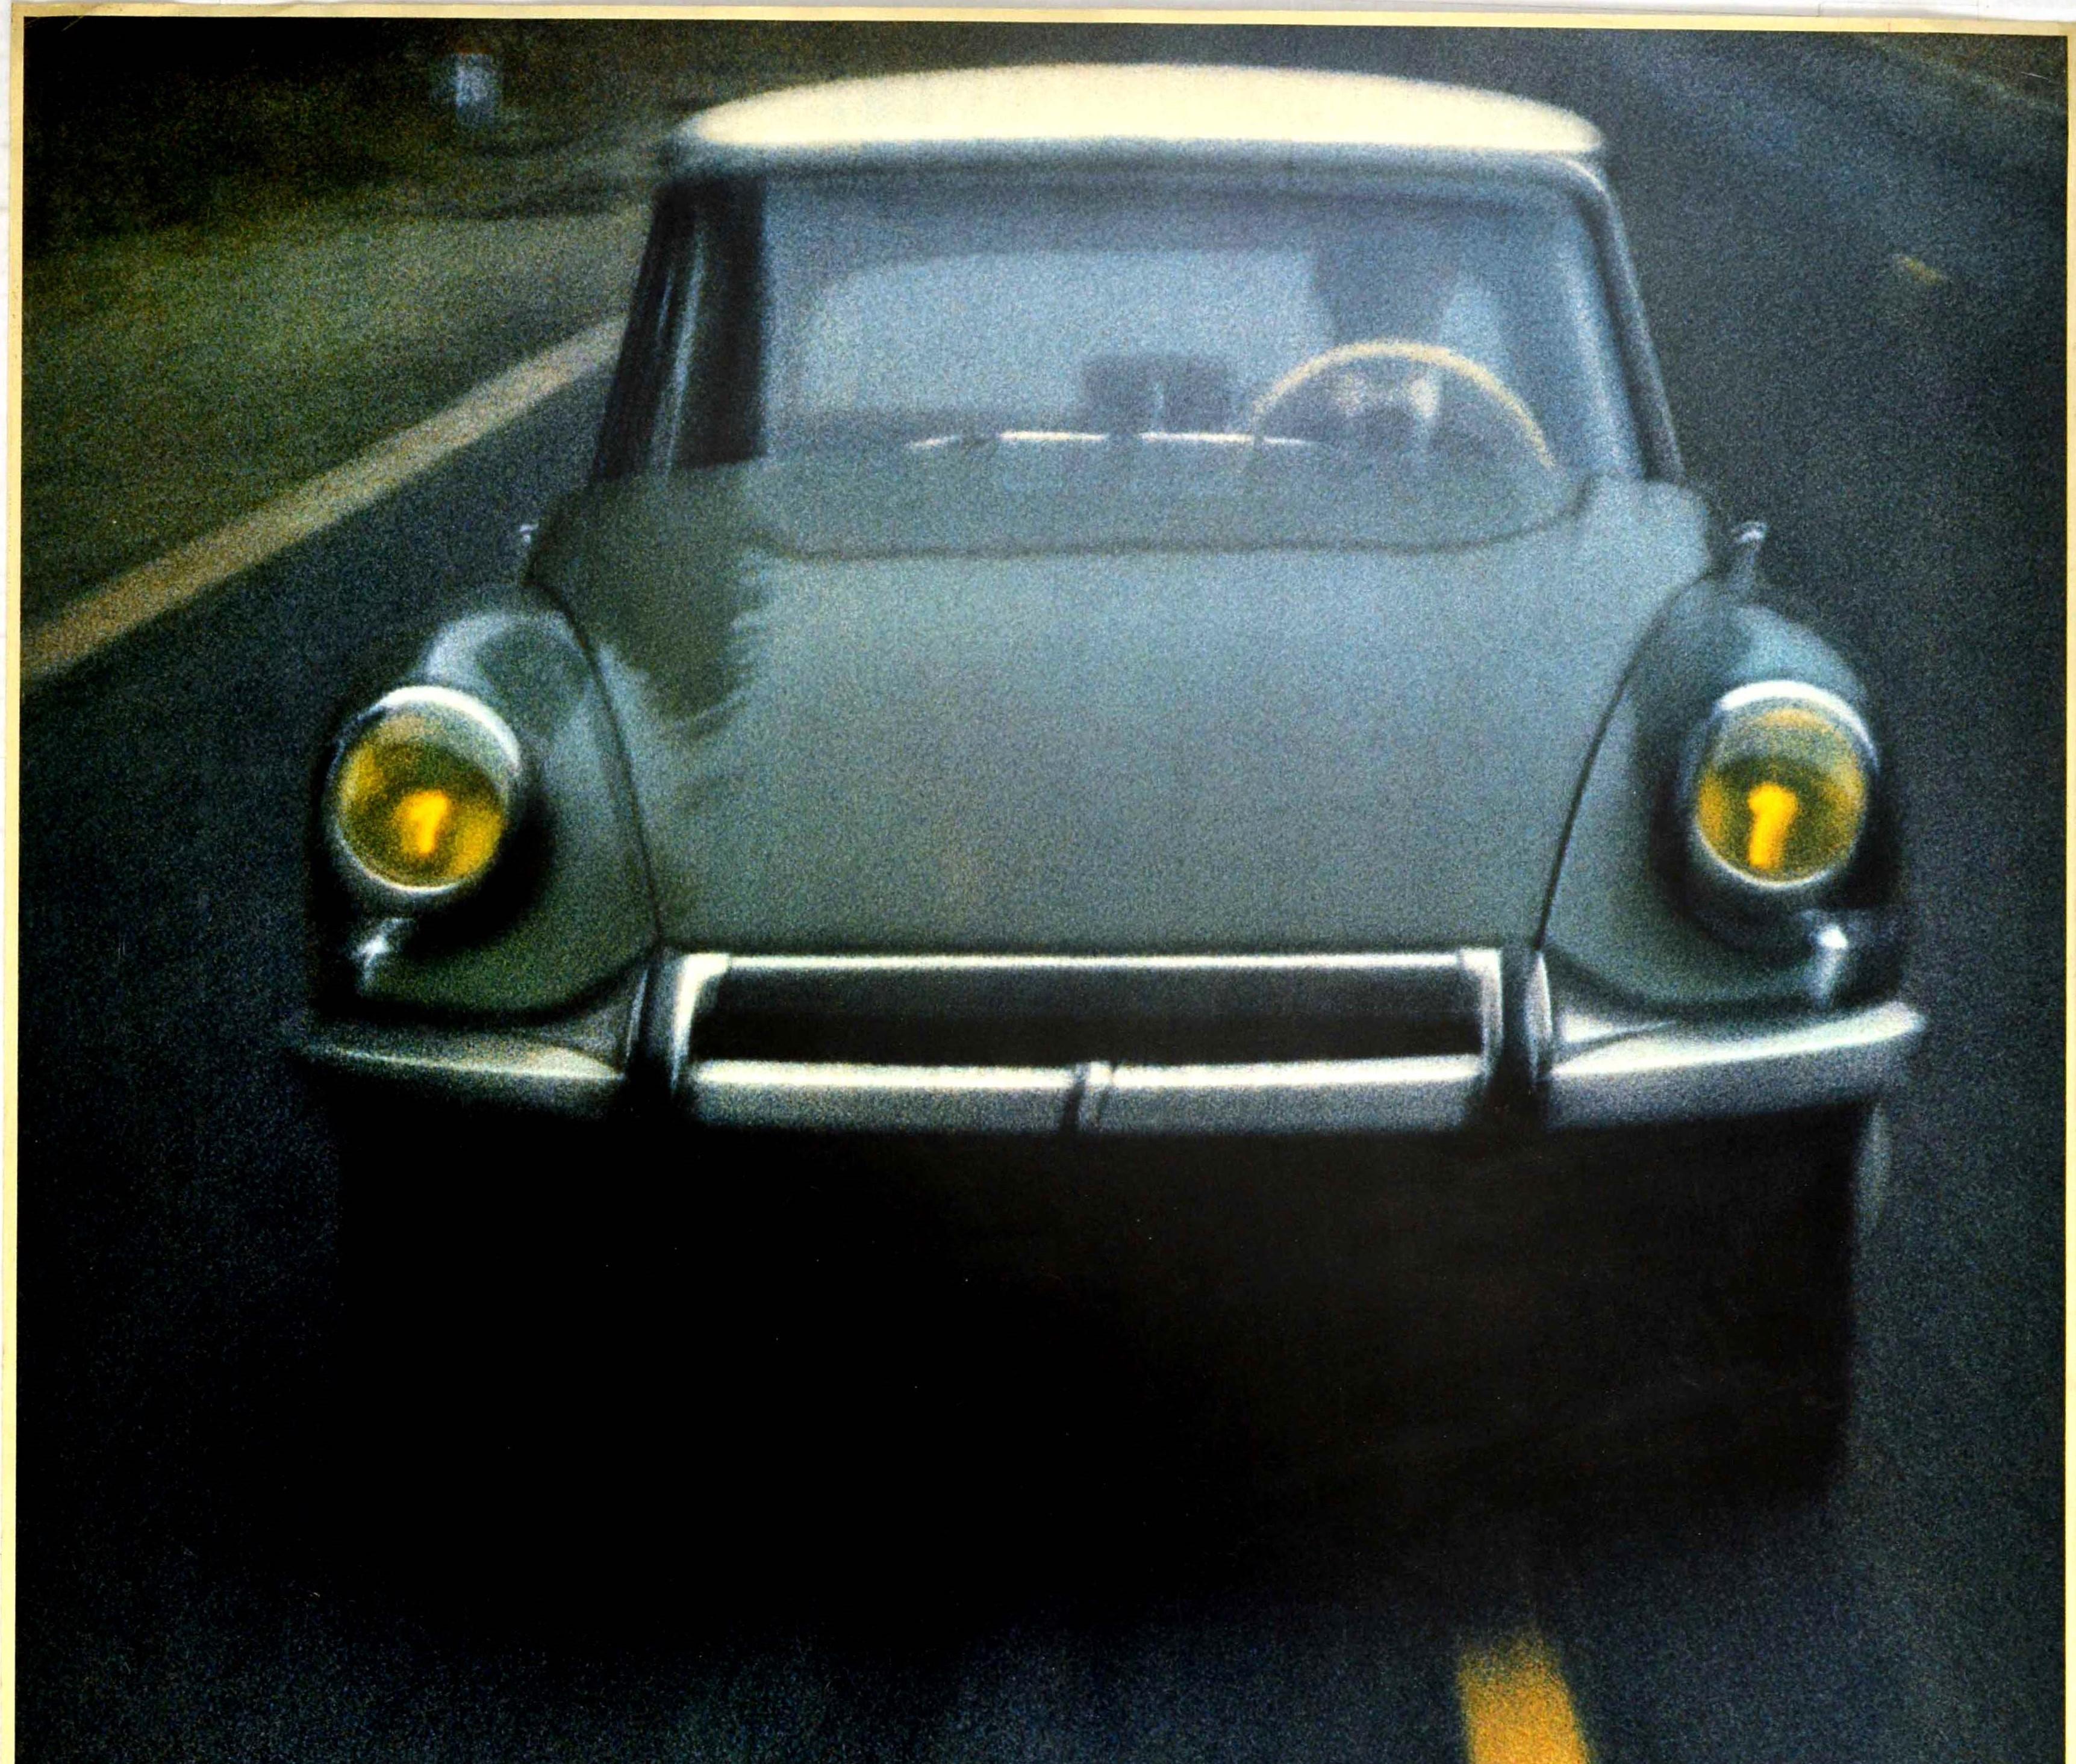 Original vintage car advertising poster issued by the French automobile manufacturer Citroen (founded 1919) featuring a great photograph of a dark green 1960 Citroen DS car speeding along a road towards the viewer, the driver wearing a suit and a